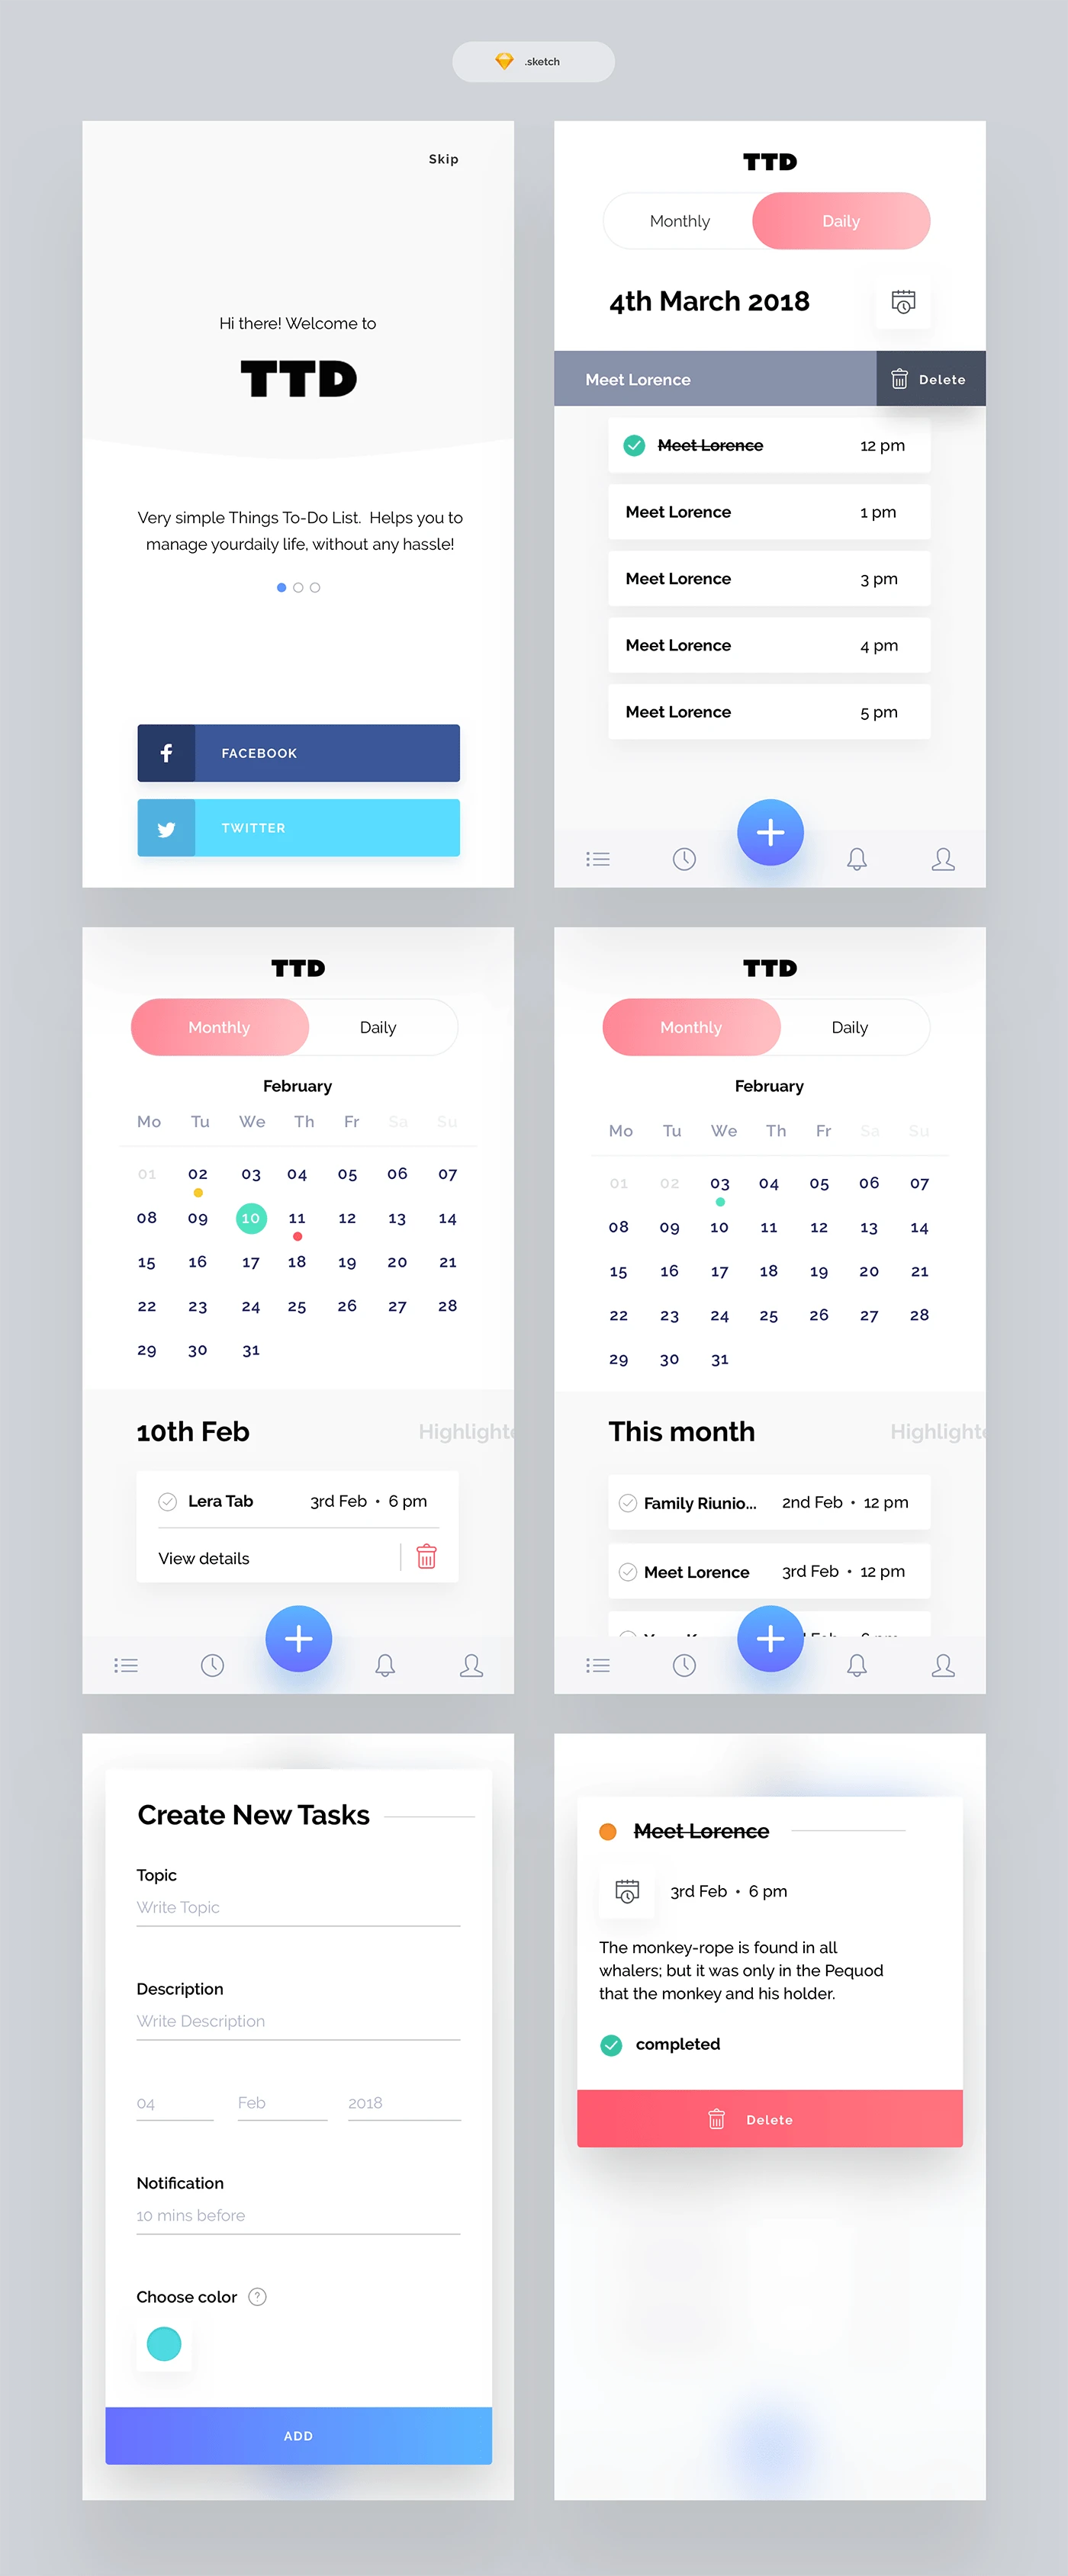 To Do List App Freebie - Design by Faria. Focused to keep the design clean and clutterless